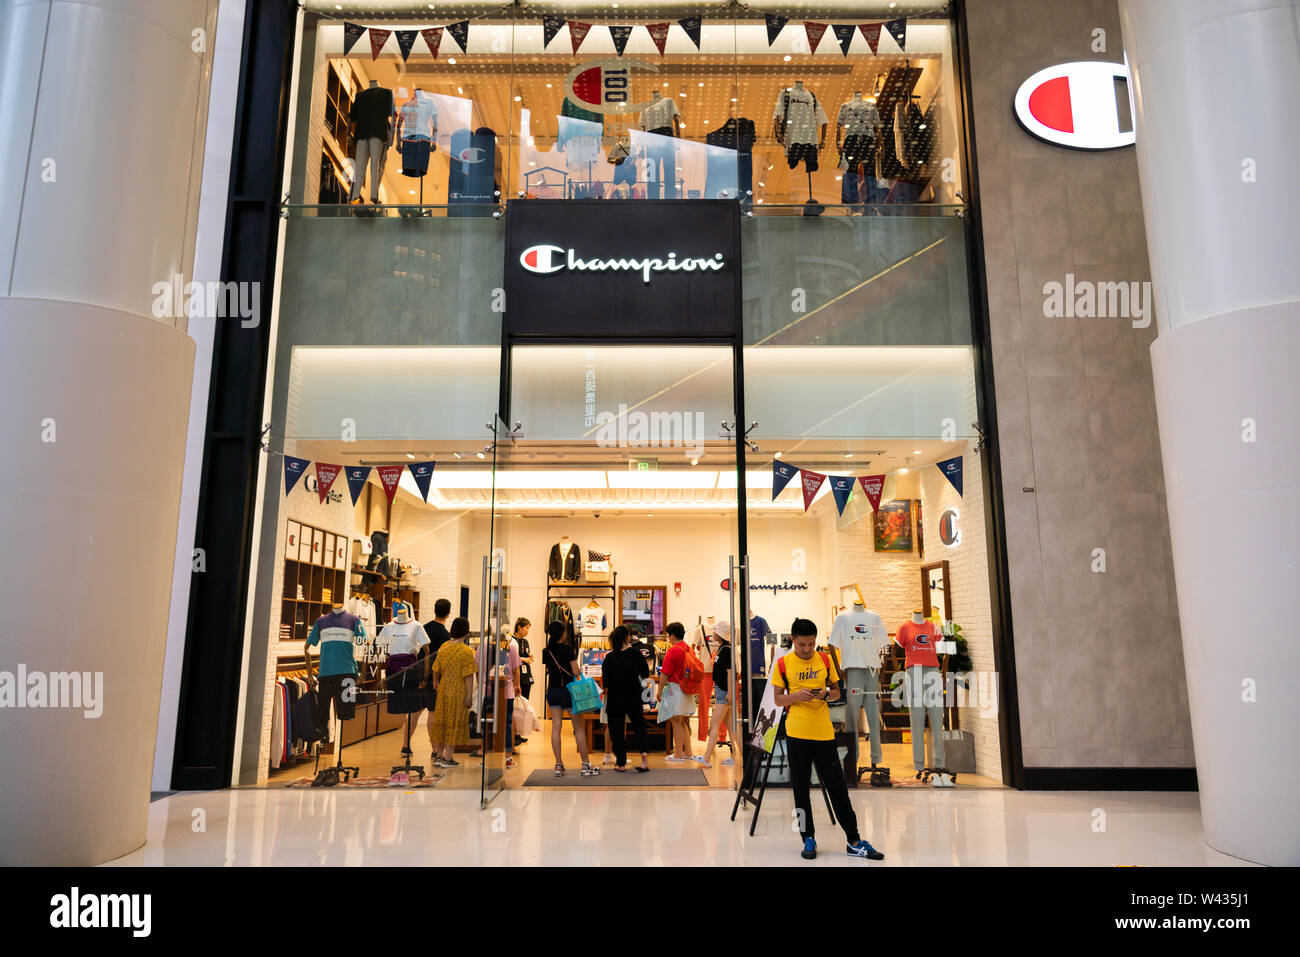 An American clothing manufacturer Champion store and logo seen in Photo - Alamy